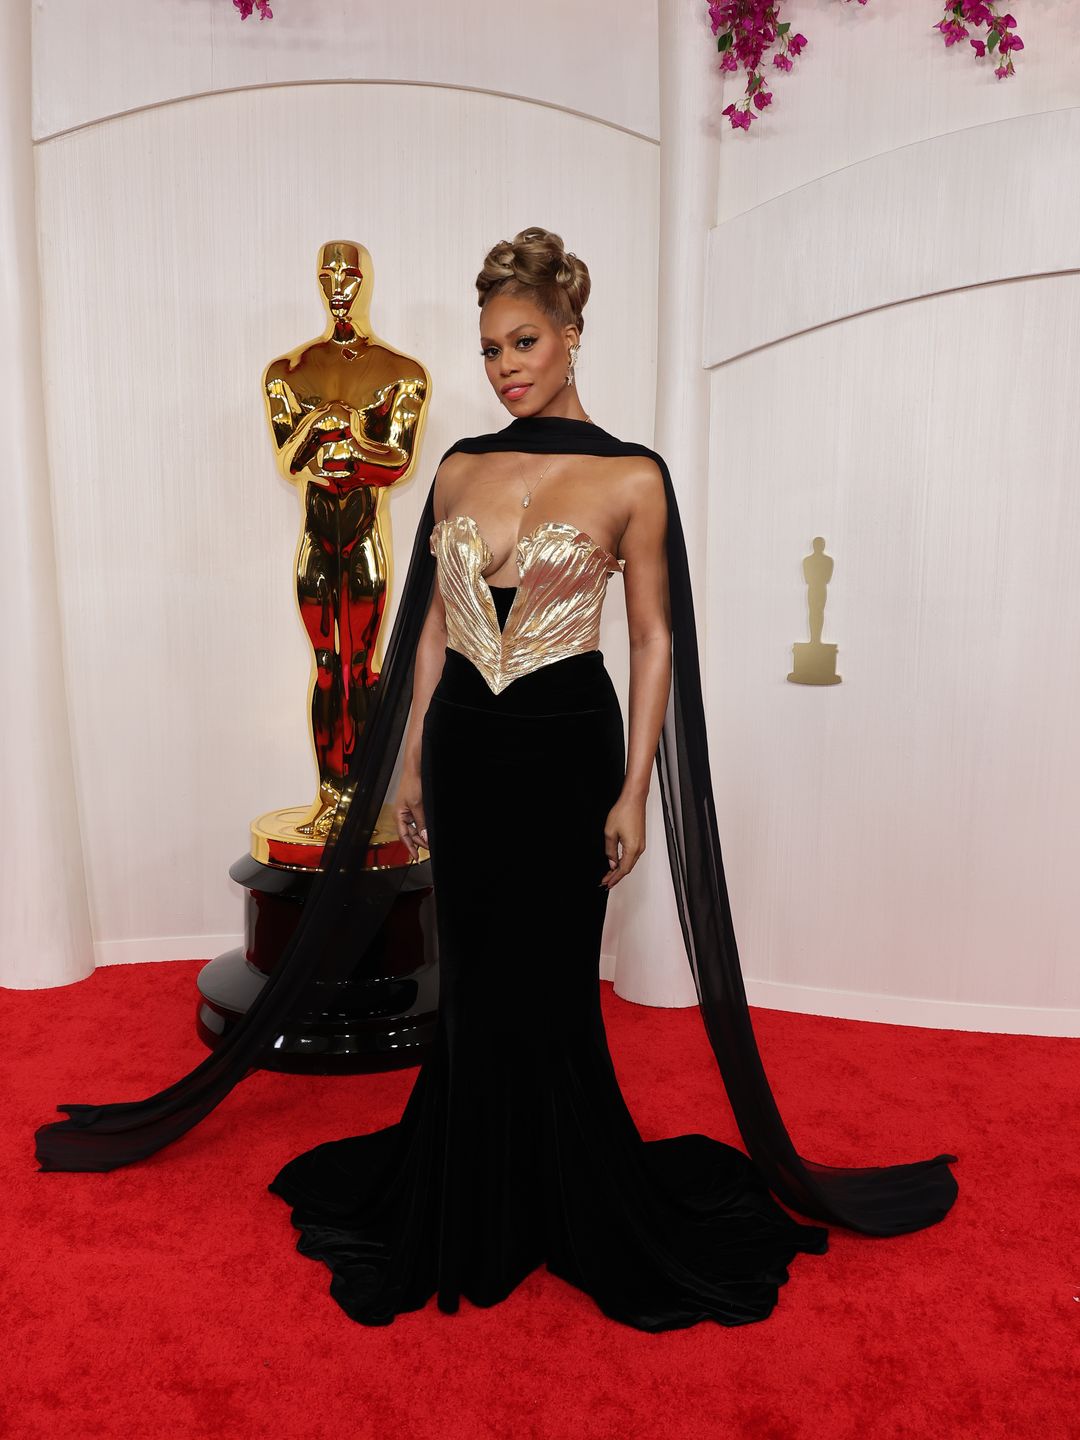 Laverne Cox attends the 96th Annual Academy Awards in a gold and black gown